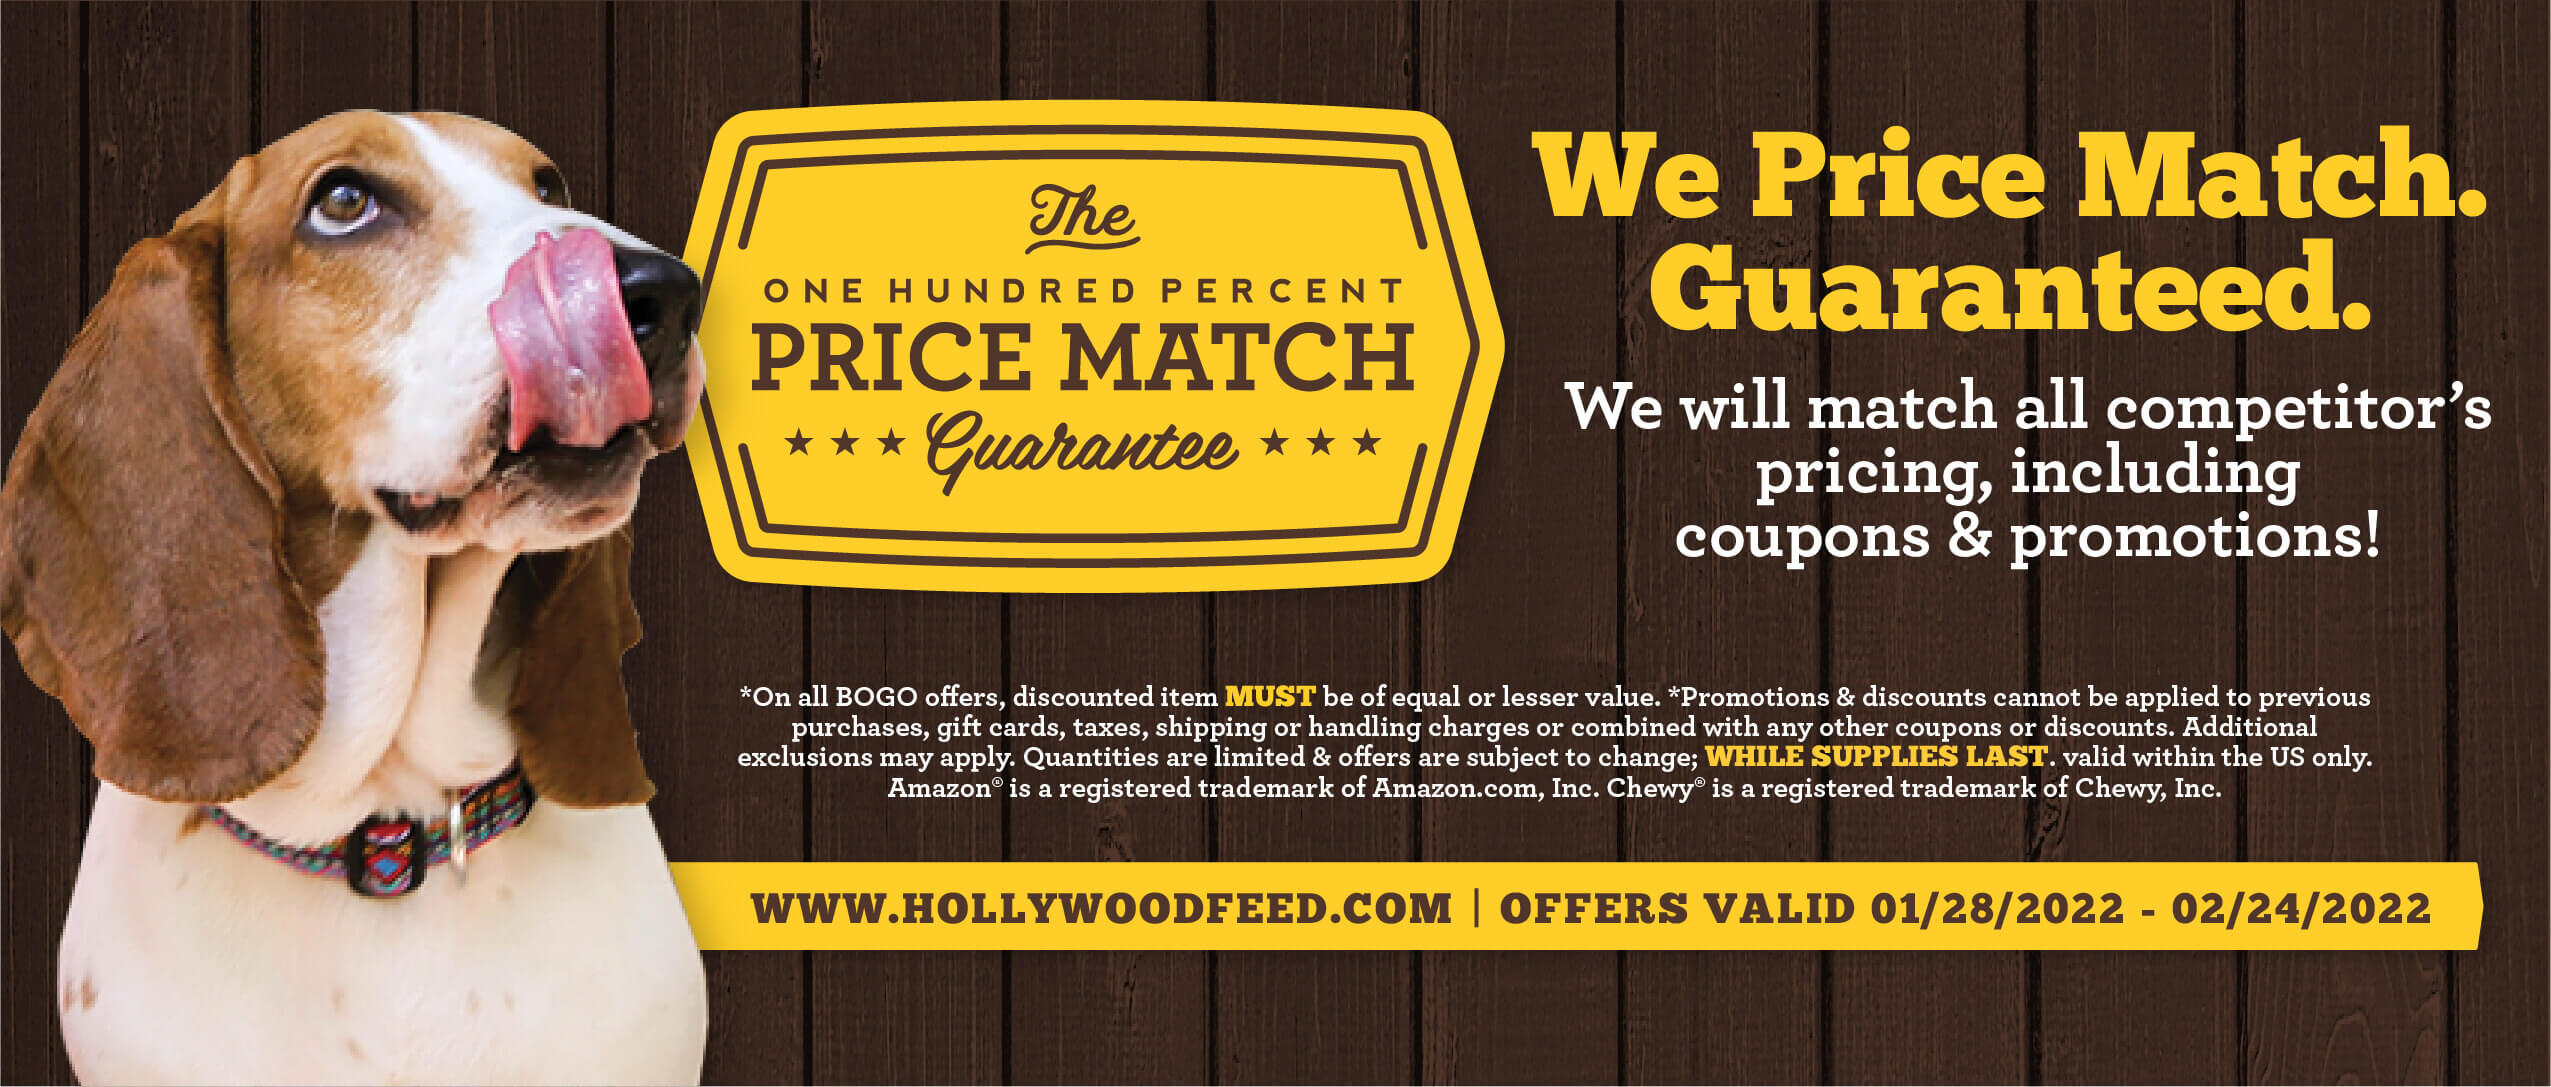 One Hundred Percent Price Match Guarantee. We will match all competitors pricing, including coupons and promotions.